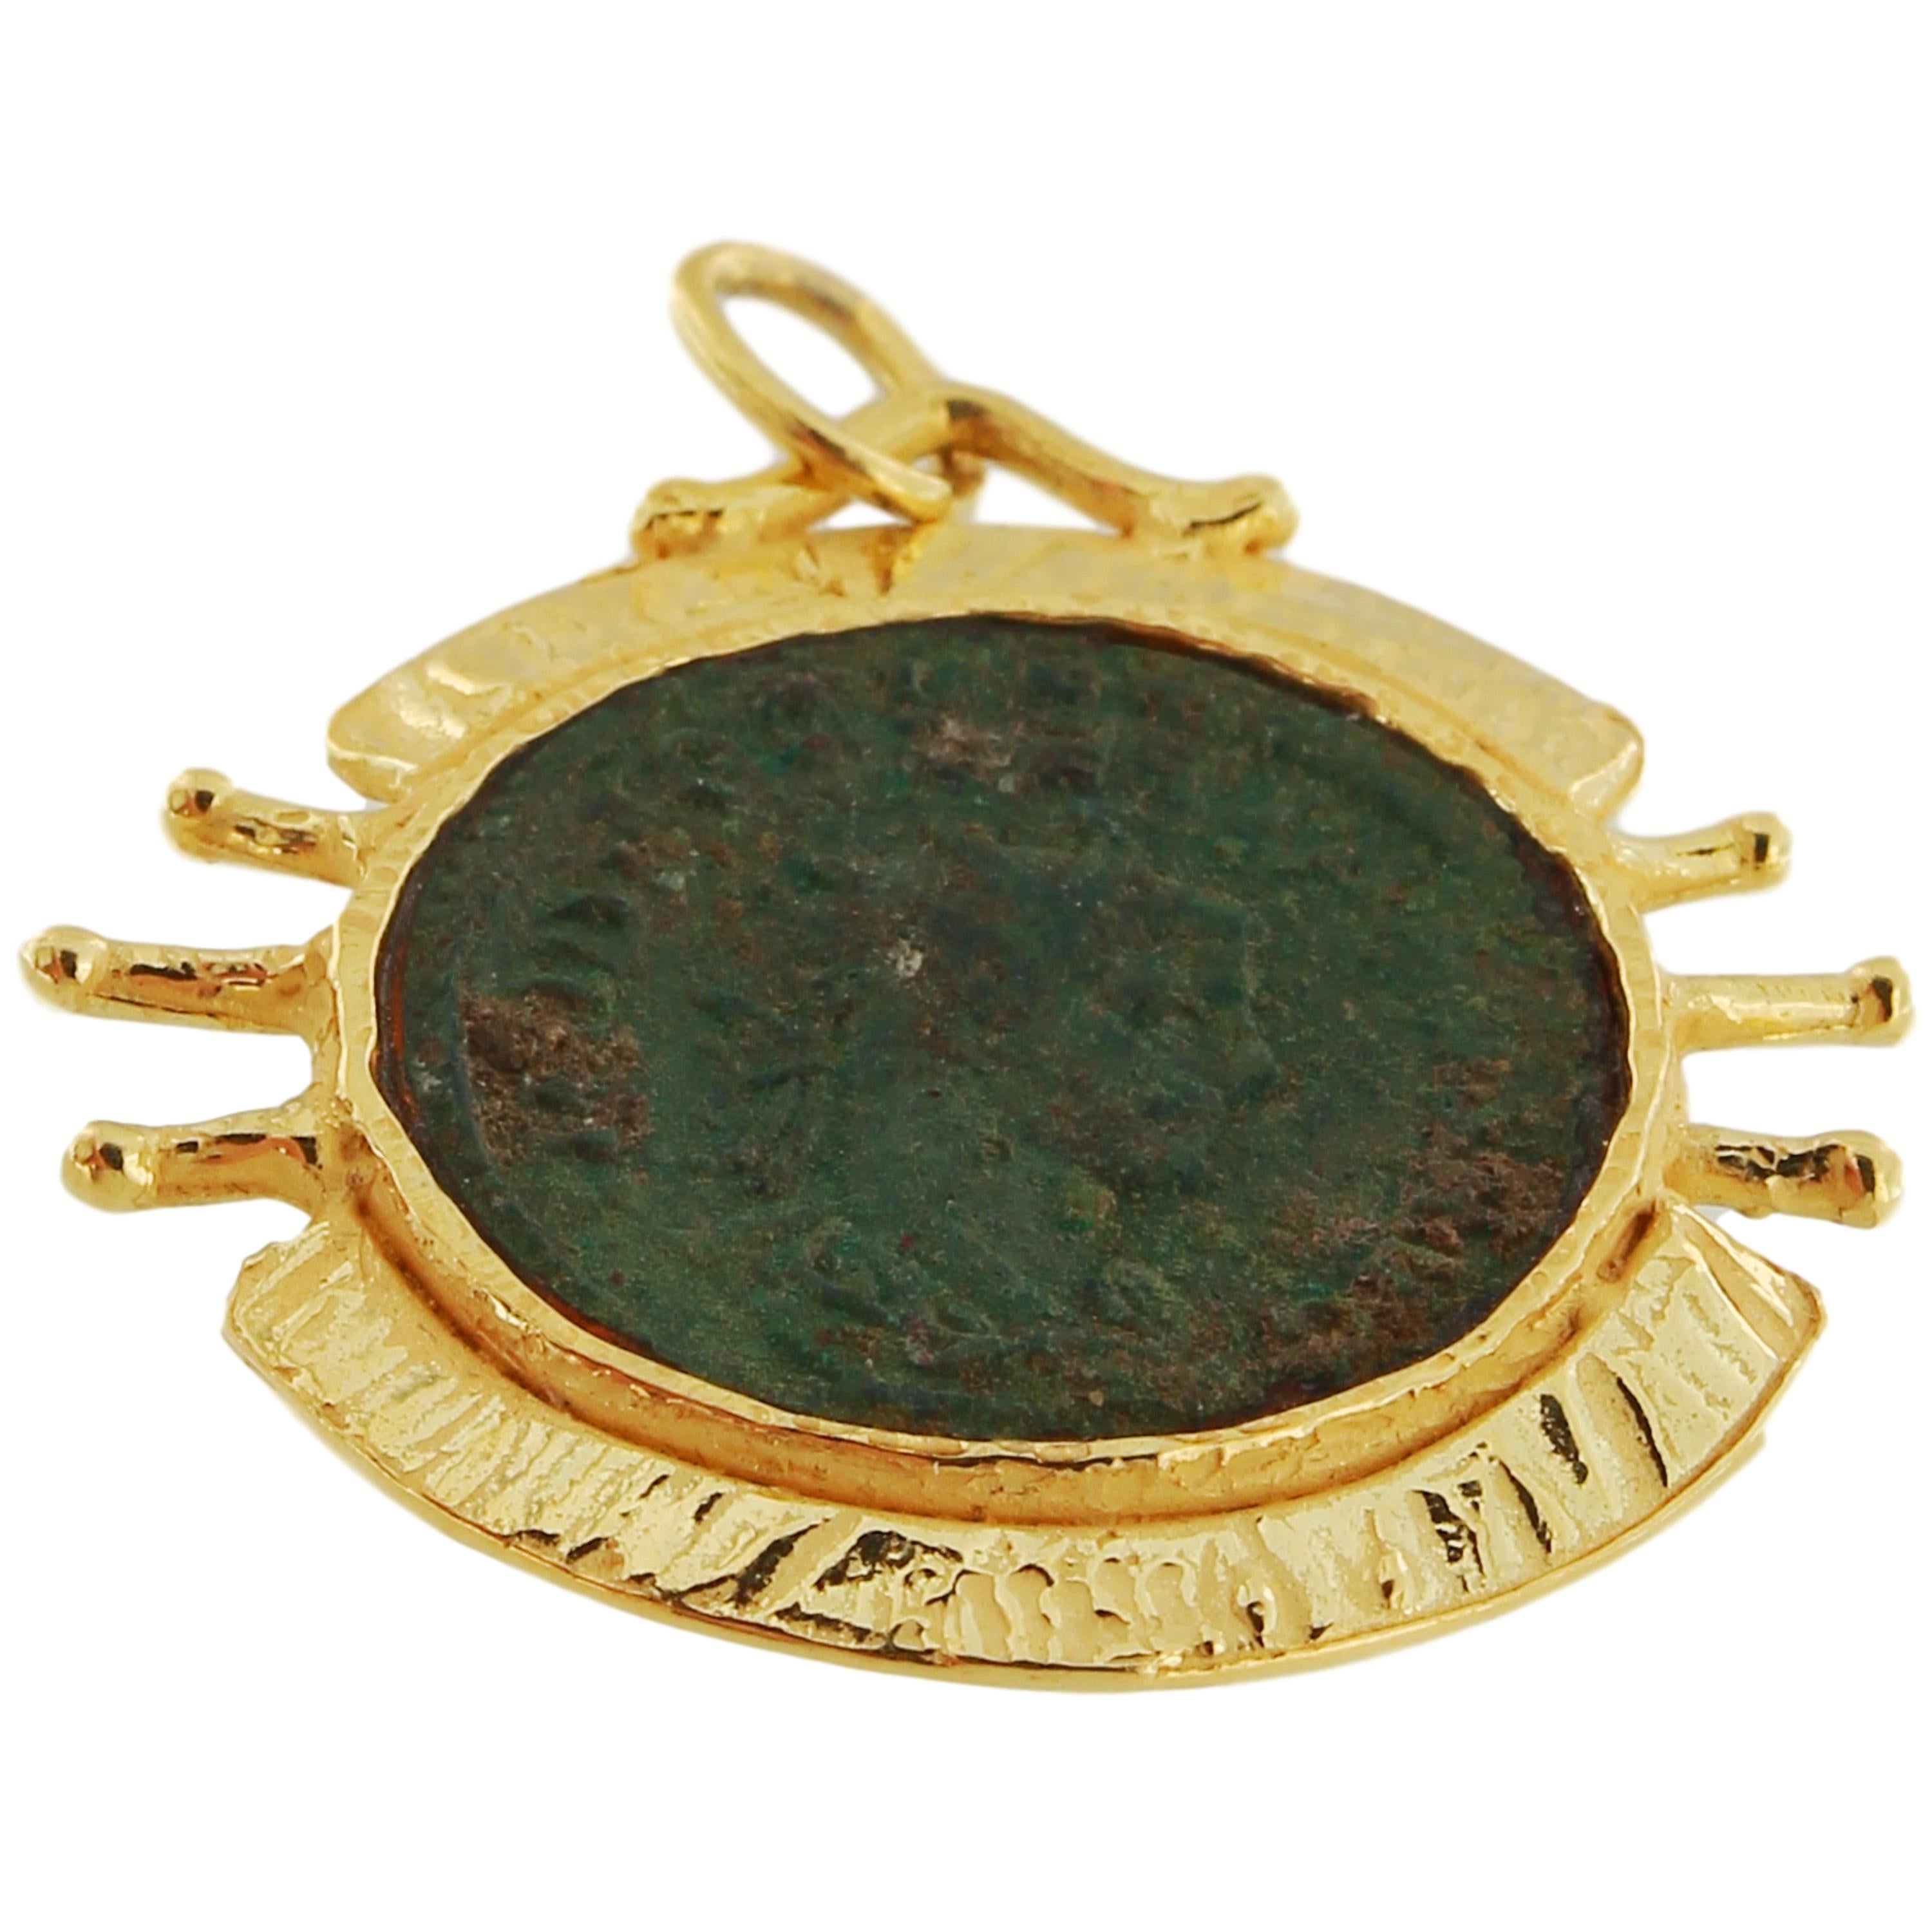 Ancient Roman Coin Satin Yellow Gold Pendant, from Sacchi’s Roma Collection, hand-crafted with lost-wax casting technique.

Lost-wax casting, one of the oldest techniques for creating Jewelry, forms the basis of Sacchi's Jewelry production.